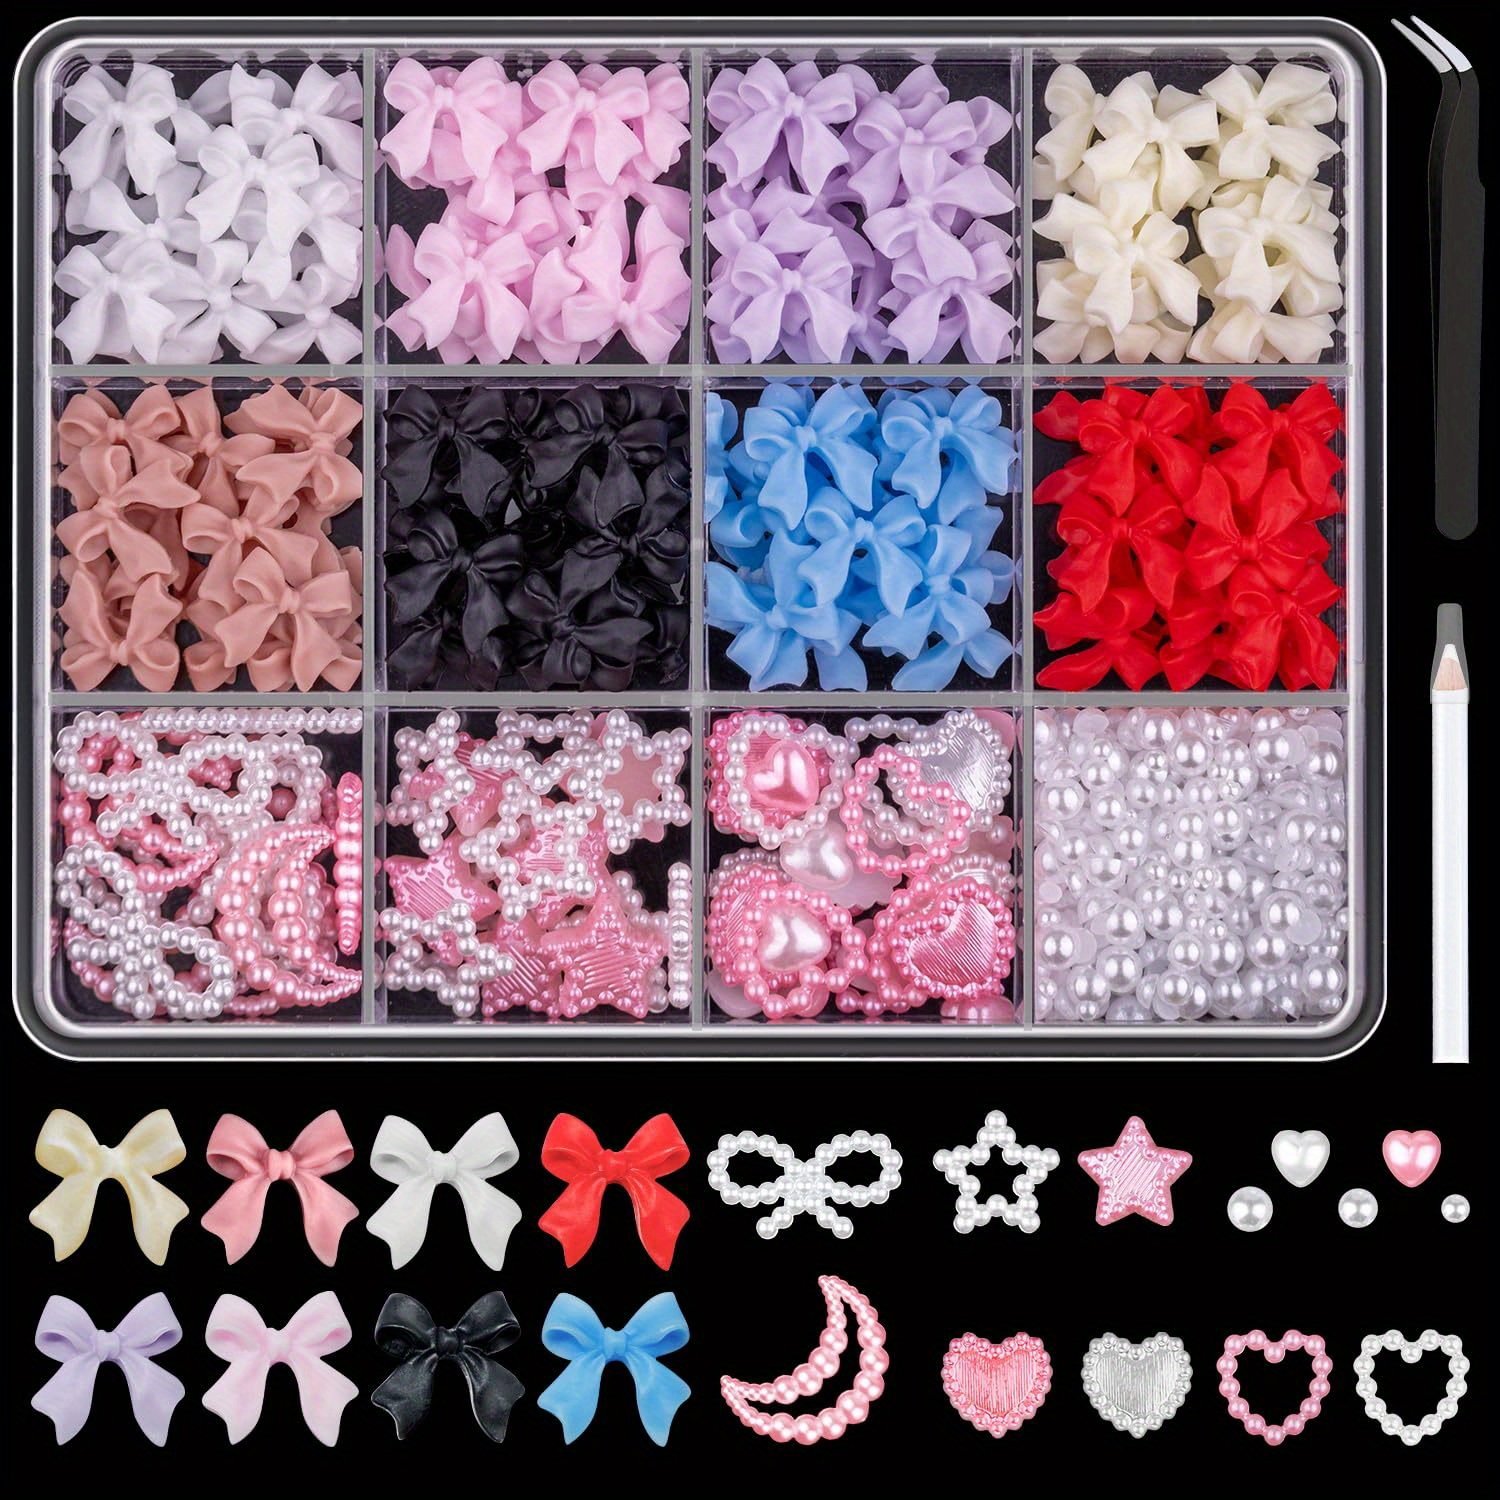 

500pcs 3d Nail Bow Charms And Flatback Pearls Set, 8 Colors Nail Bows Charm + Pink&white Star Heart Moon Cute Nail Jewels + 2-4mm White Nail Pearls For Nail Art Diy Decoration With Pickup Tools